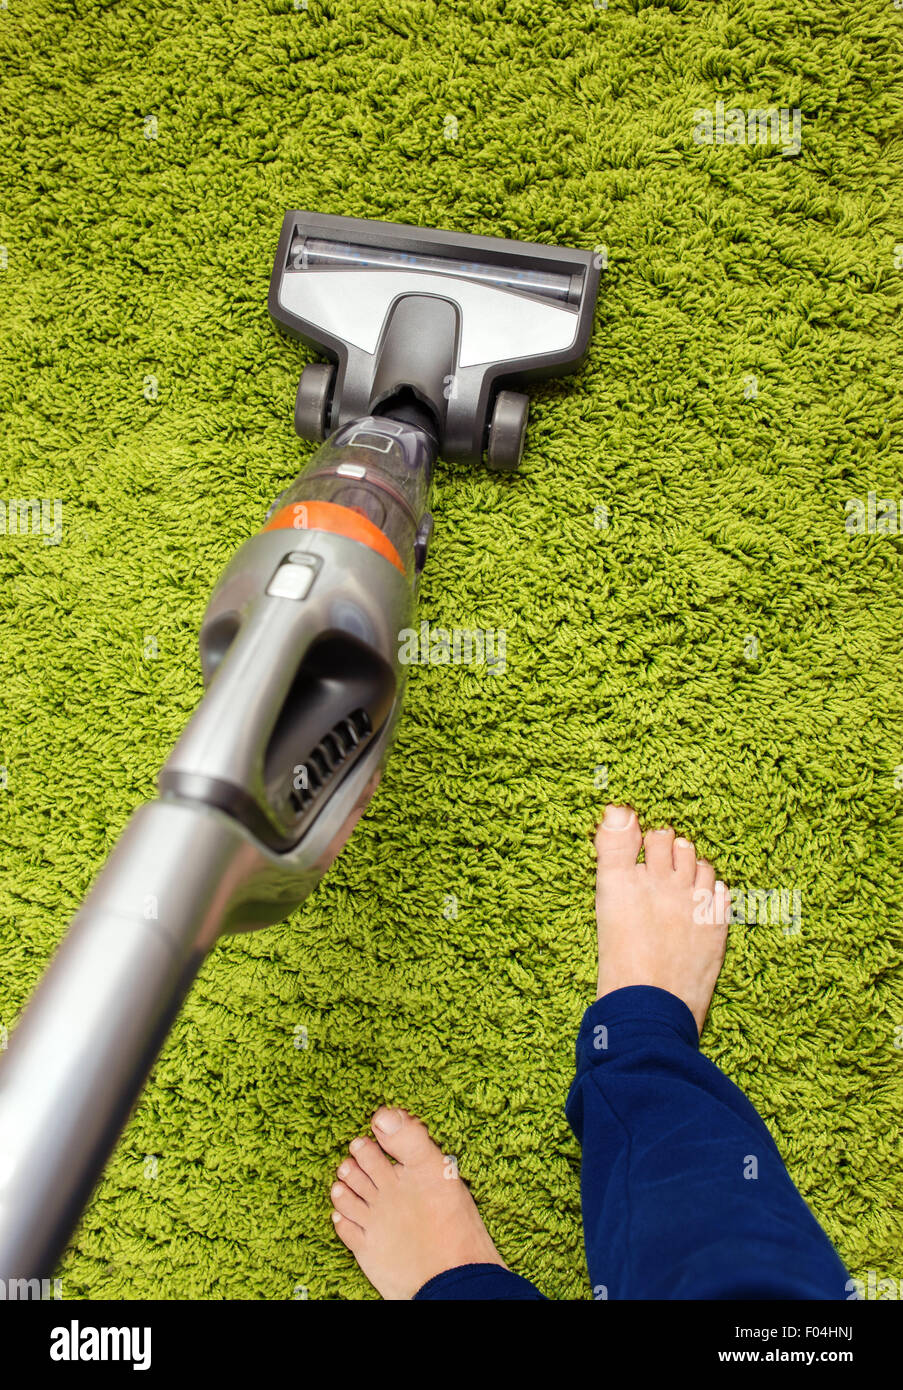 Vacuum cleaner in action - a men cleaner a carpet Stock Photo